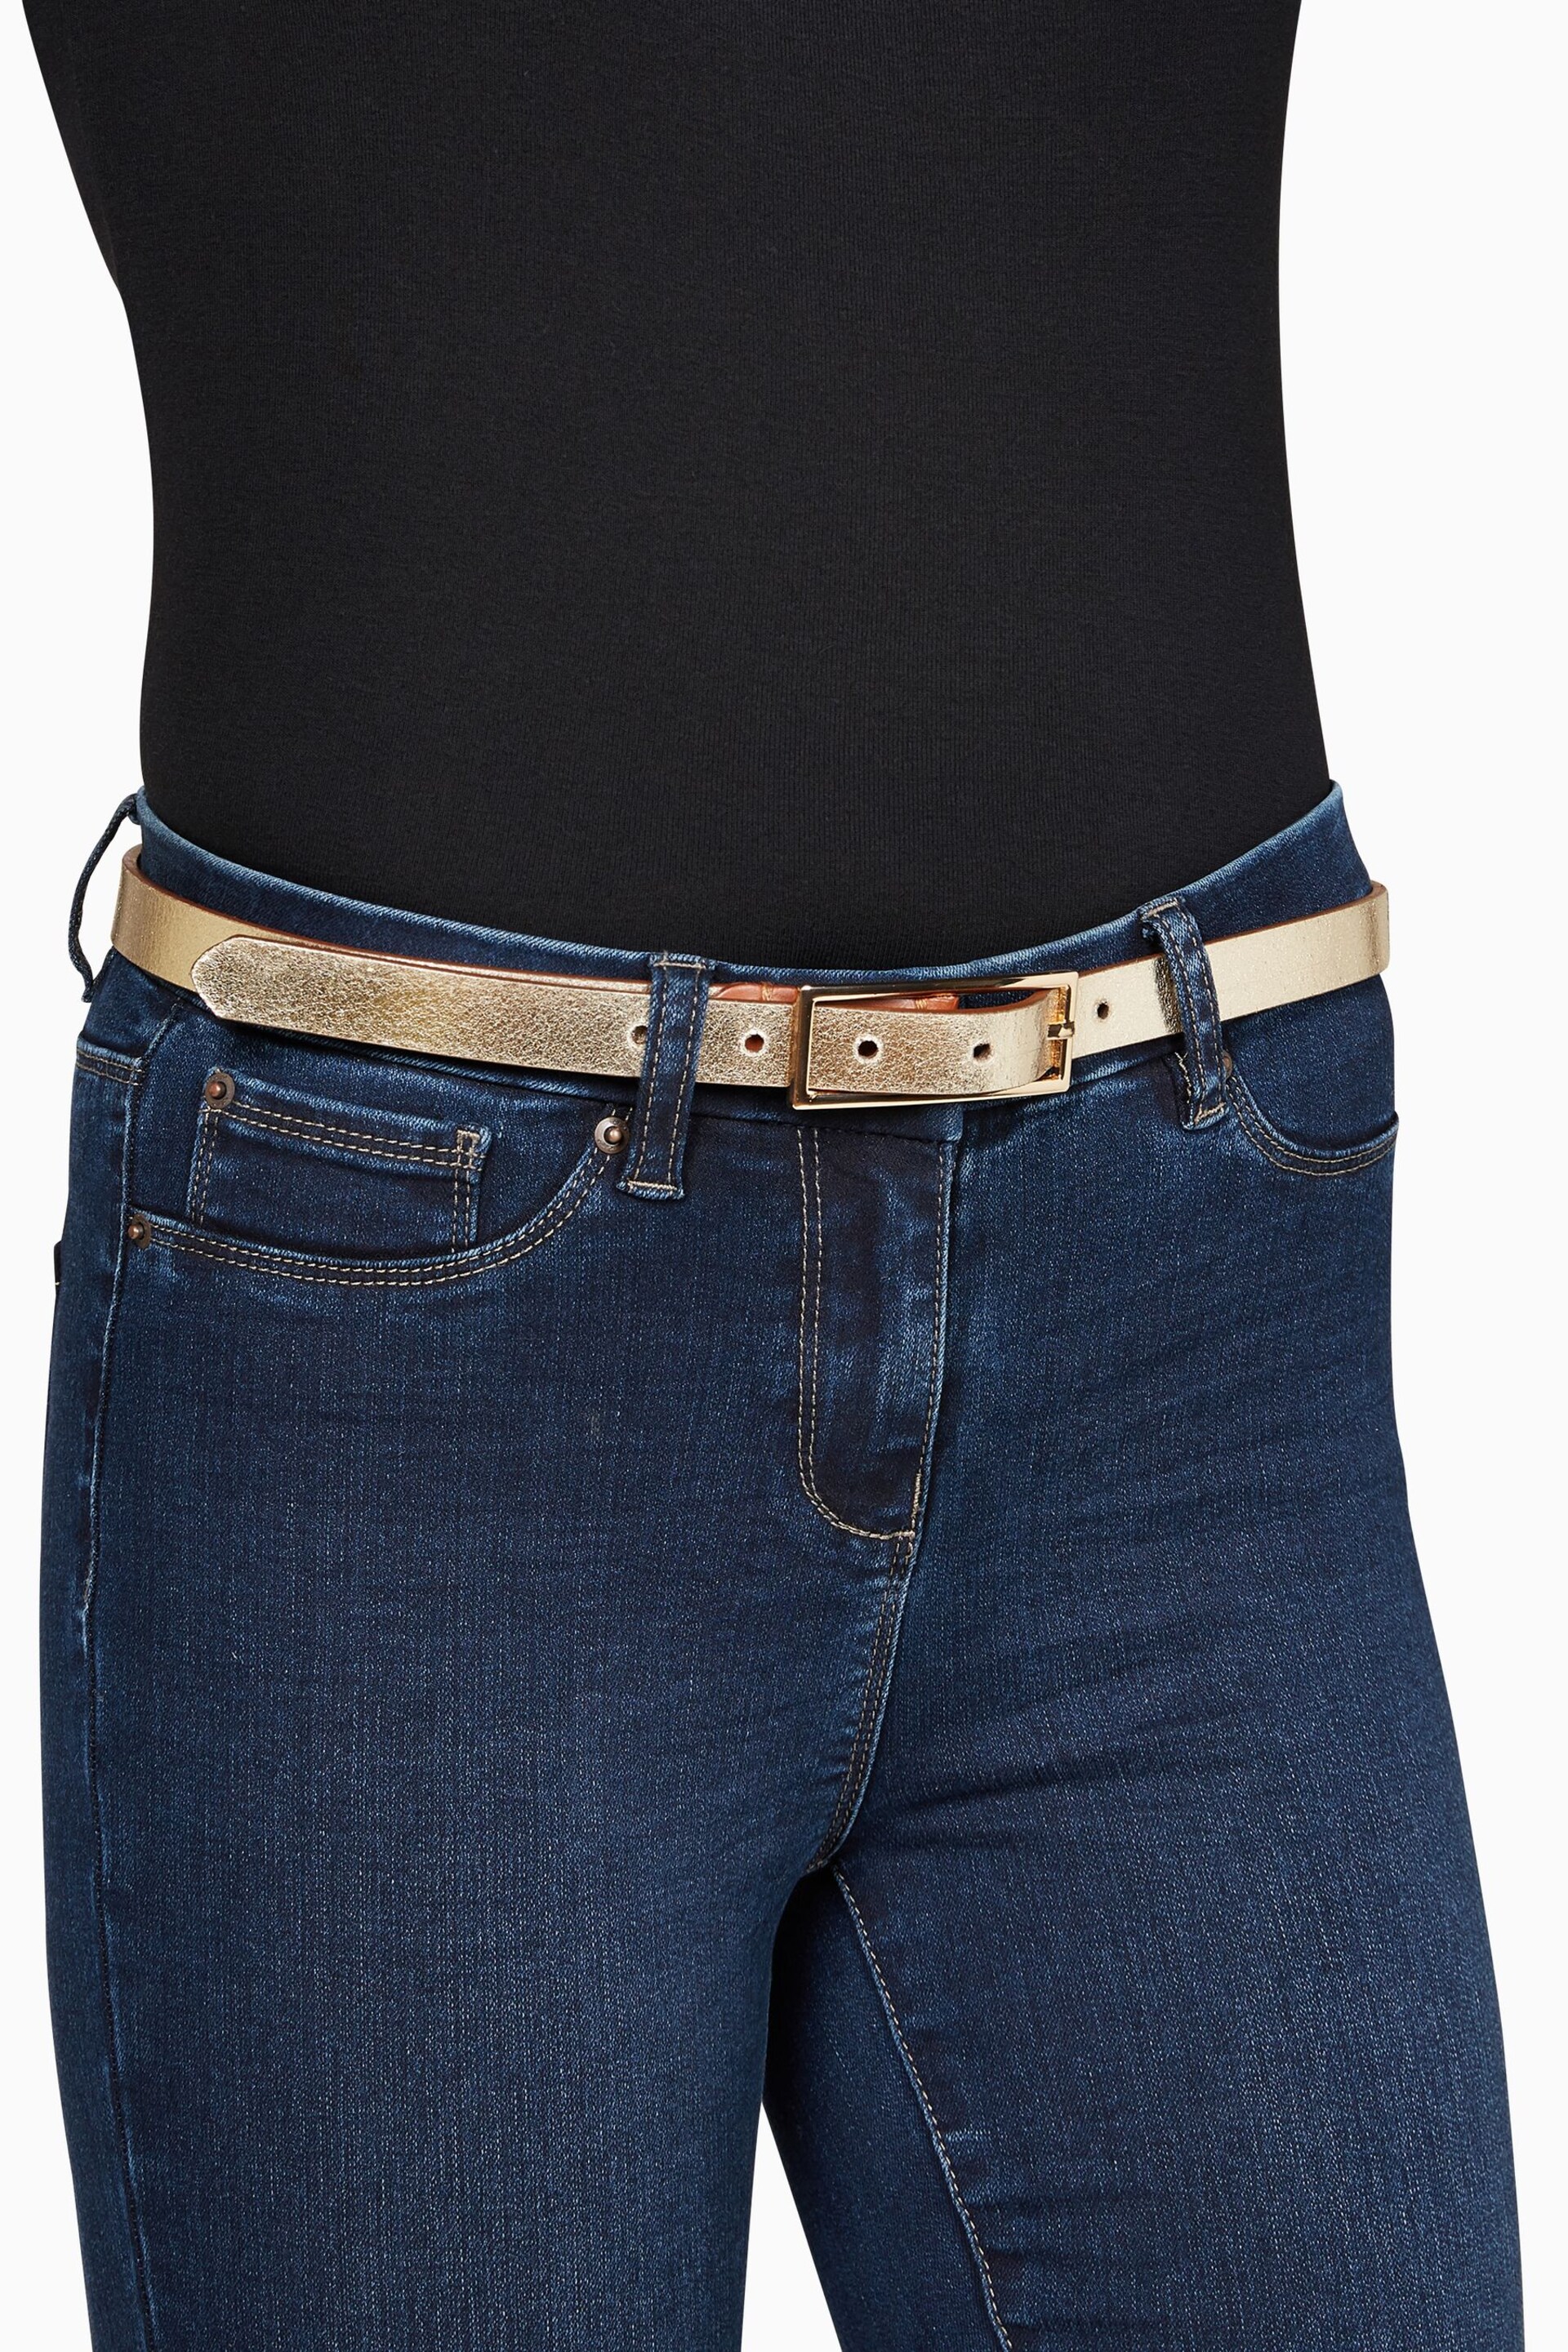 Tan/Gold Leather Reversible Jeans Belt - Image 6 of 6